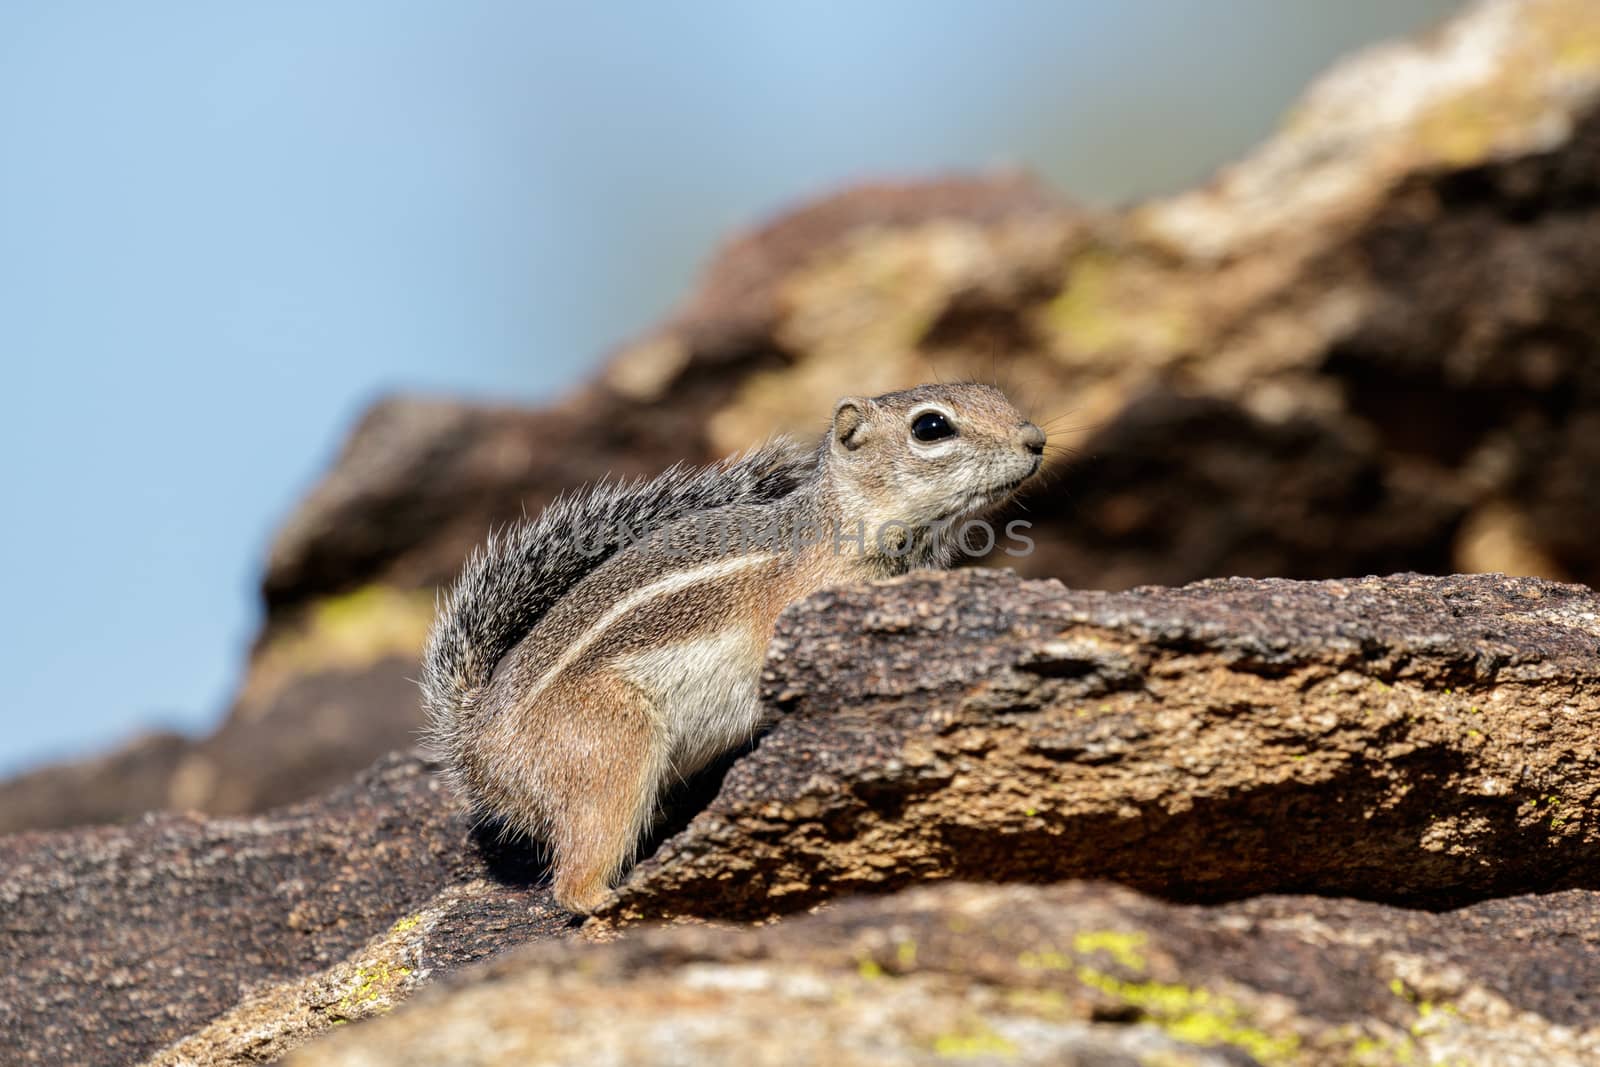 Chipmunk stands on a stone in the sunshine on a blurred background of stones